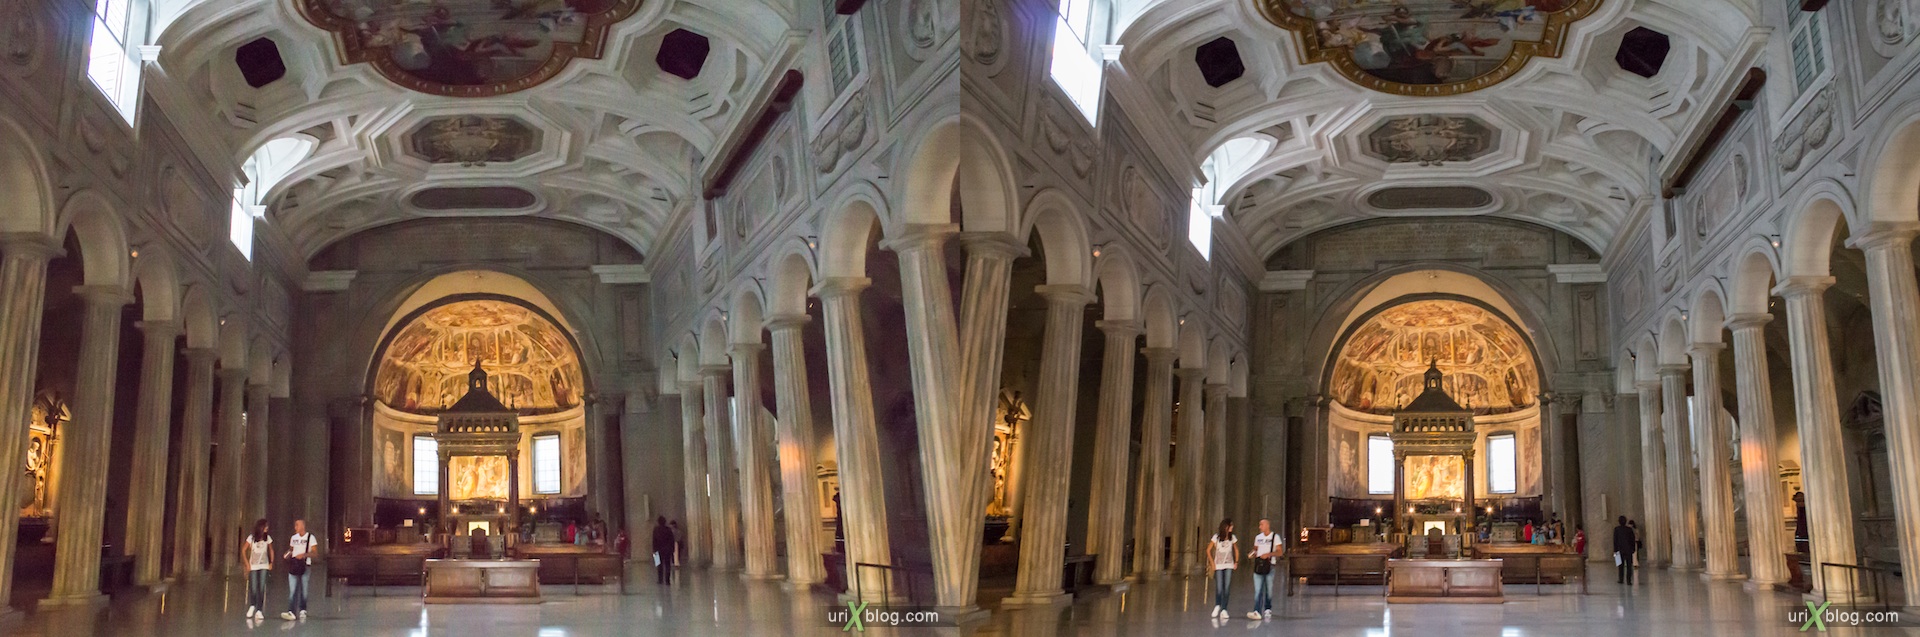 2012, church of San Pietro in Vincoli, Rome, Italy, cathedral, monastery, Christianity, Catholicism, 3D, stereo pair, cross-eyed, crossview, cross view stereo pair